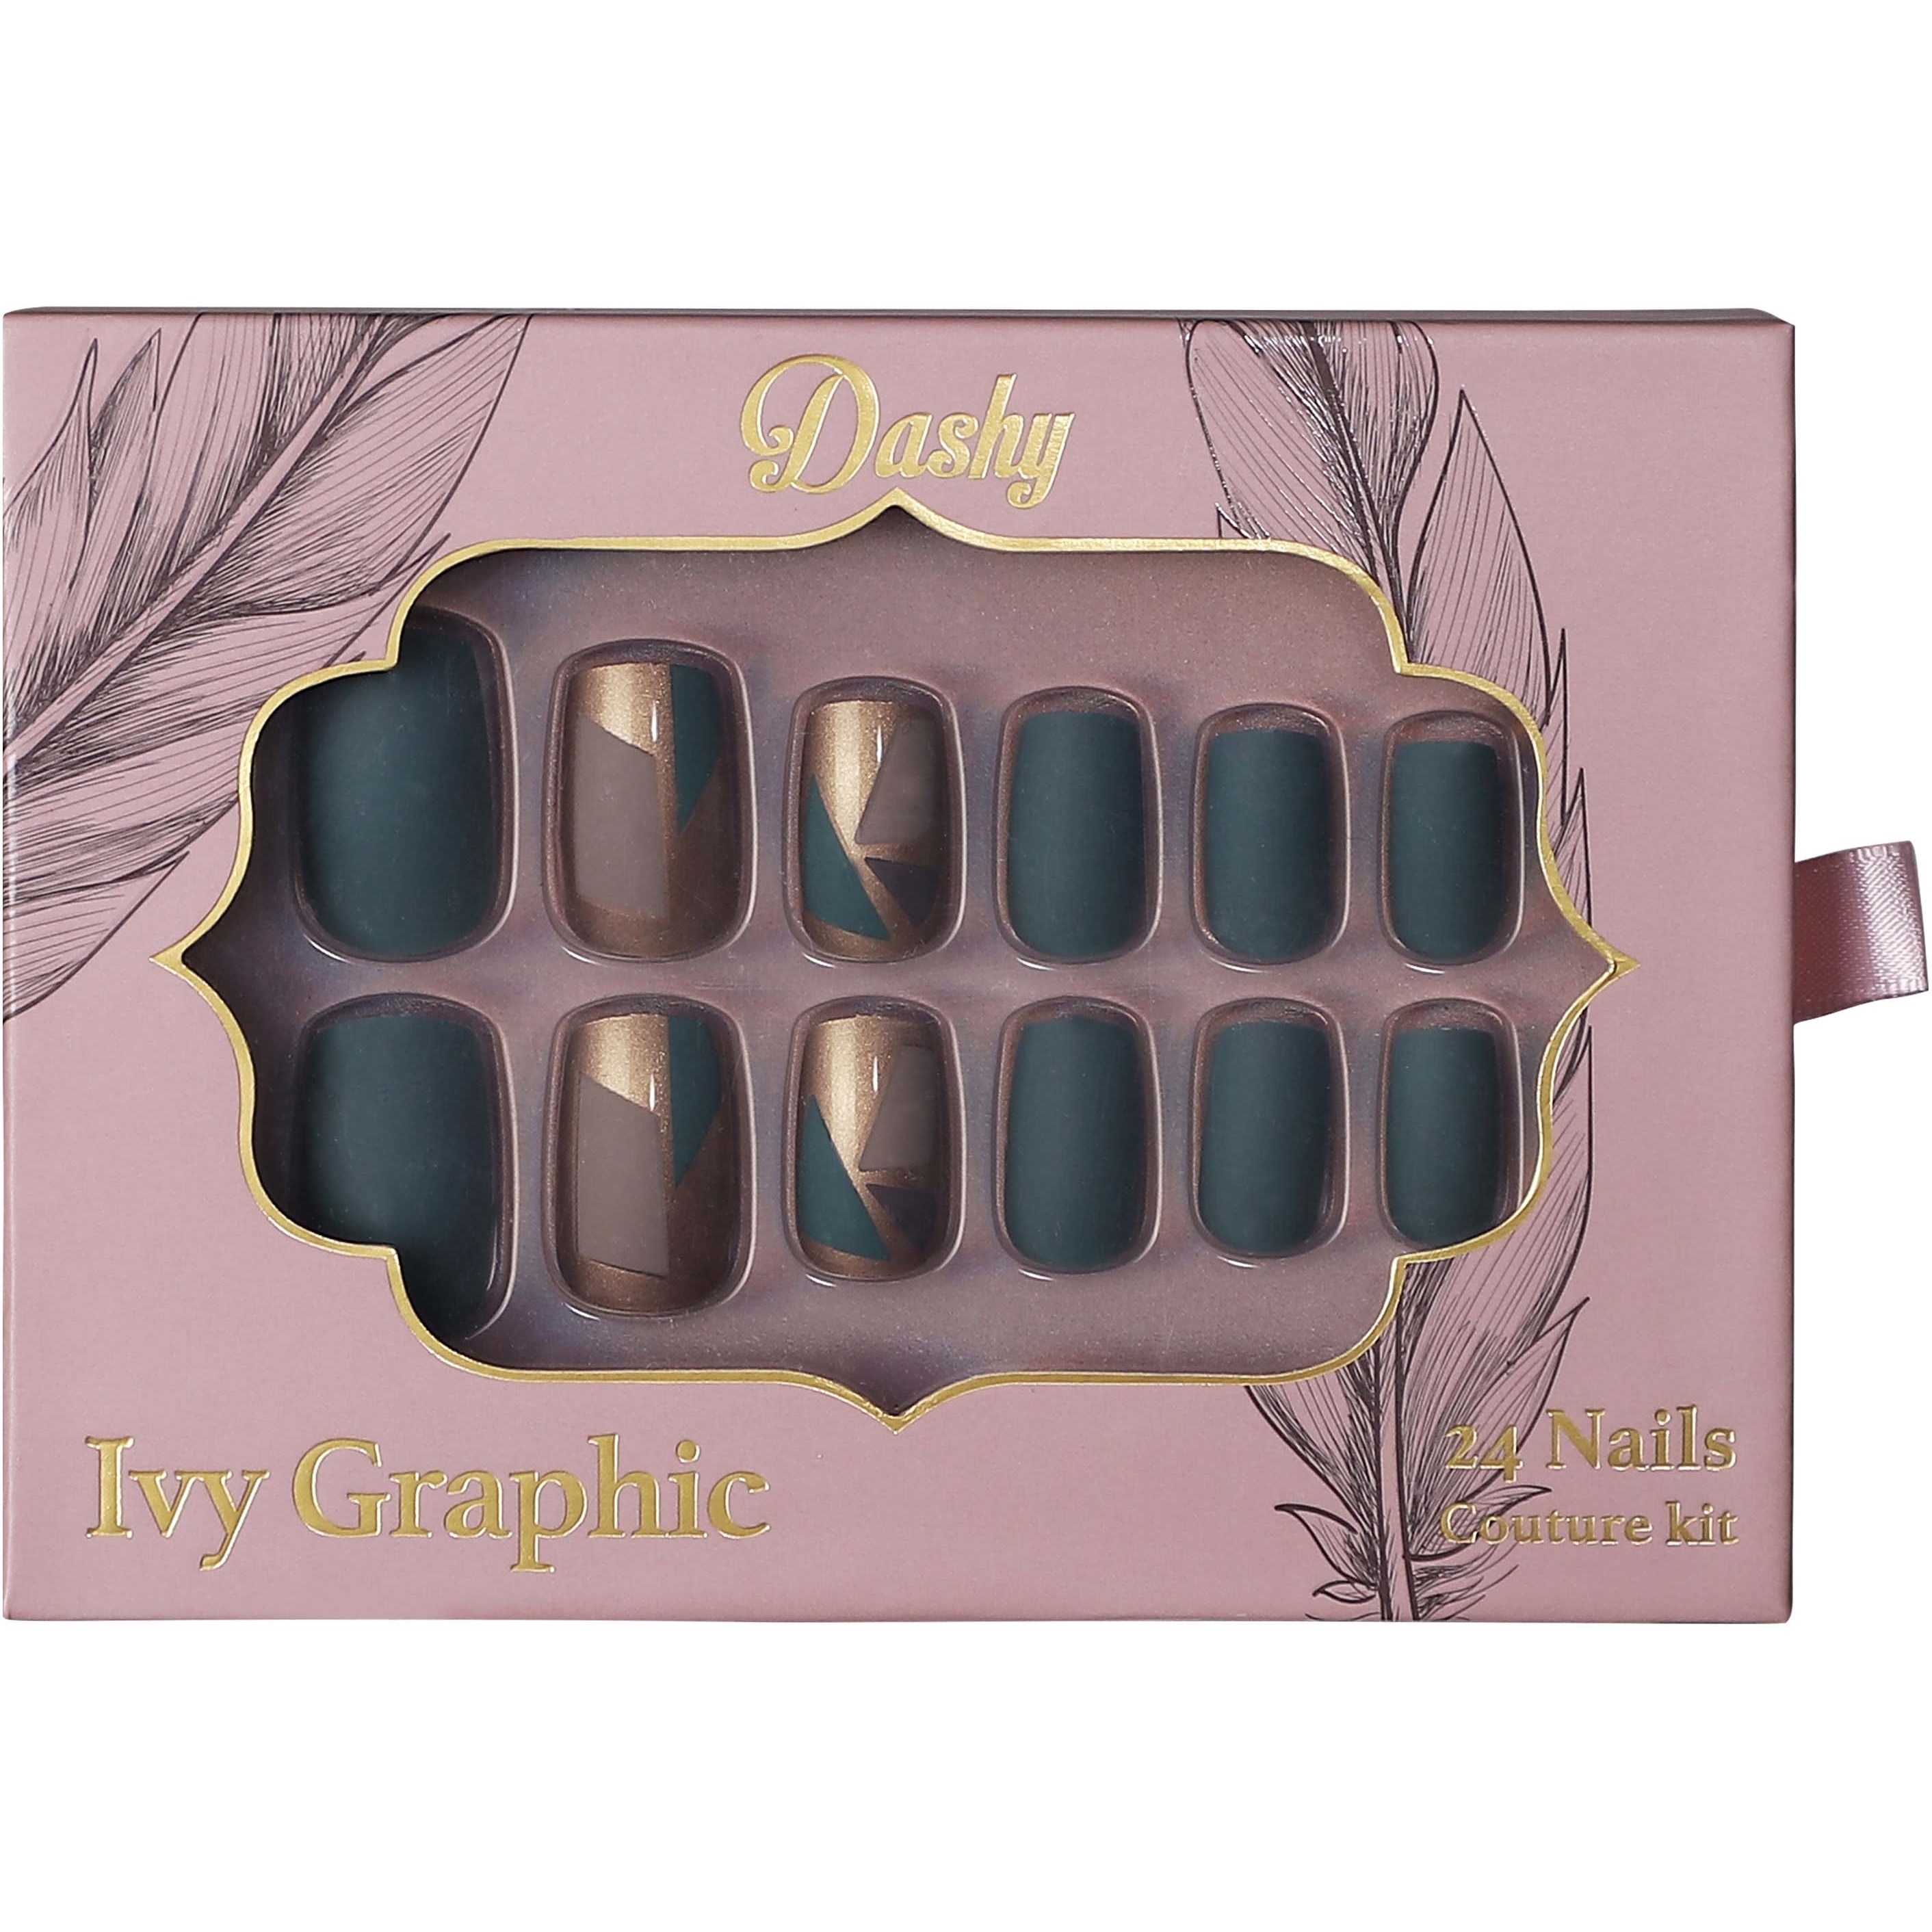 Läs mer om Dashy 24 Nails Couture Kit Ivy Graphic